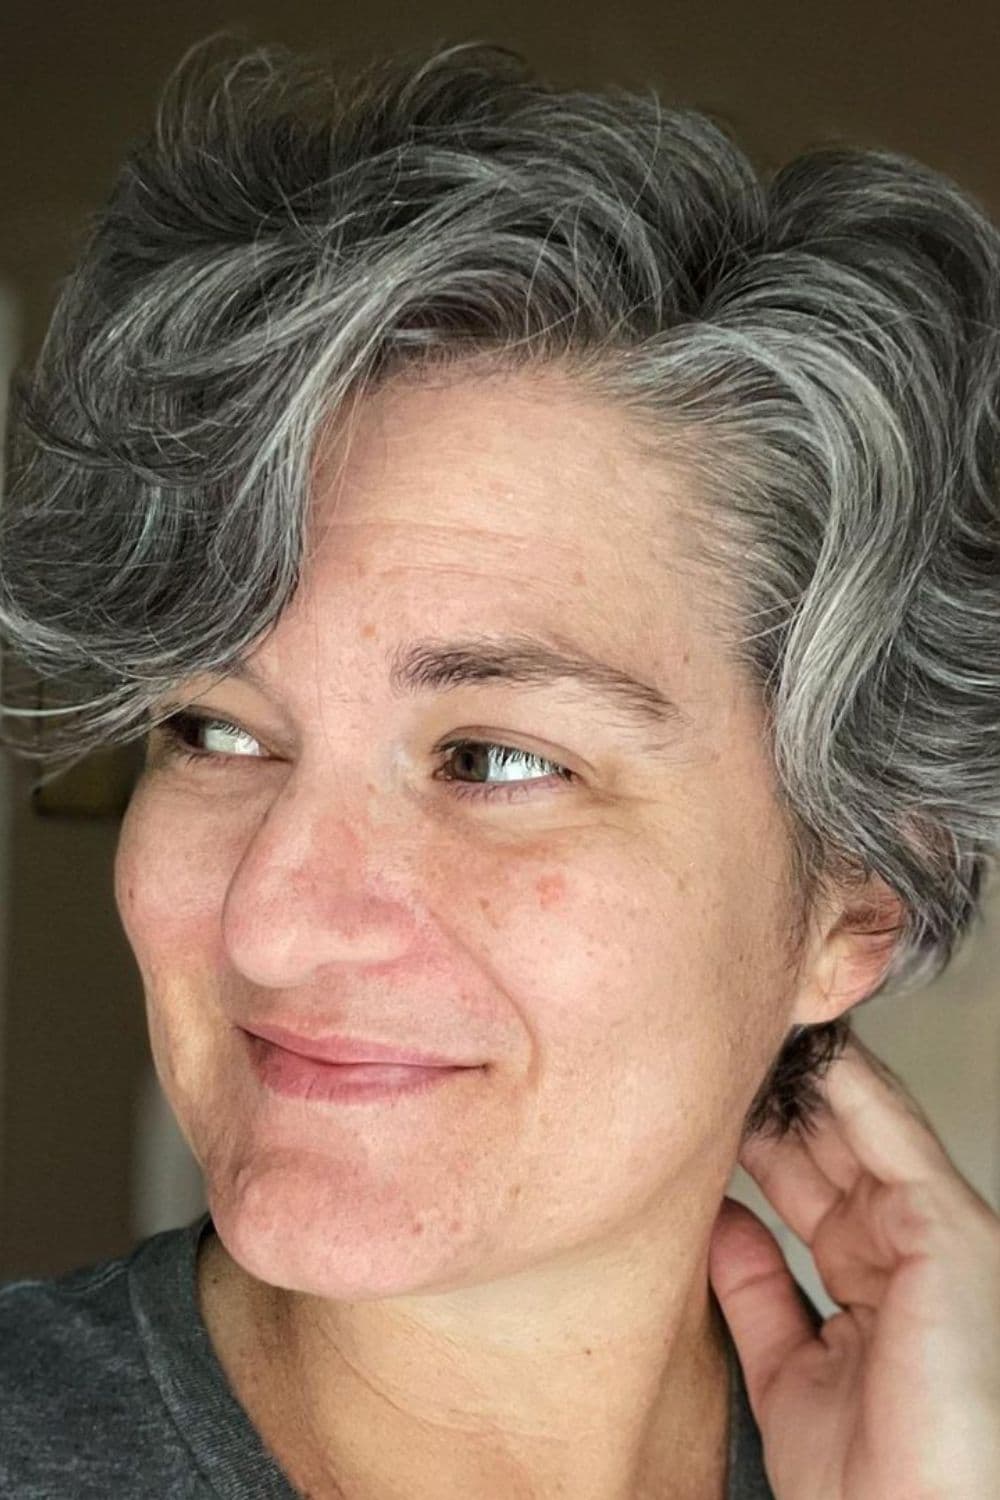 A woman with wavy gray classic pixie cut.